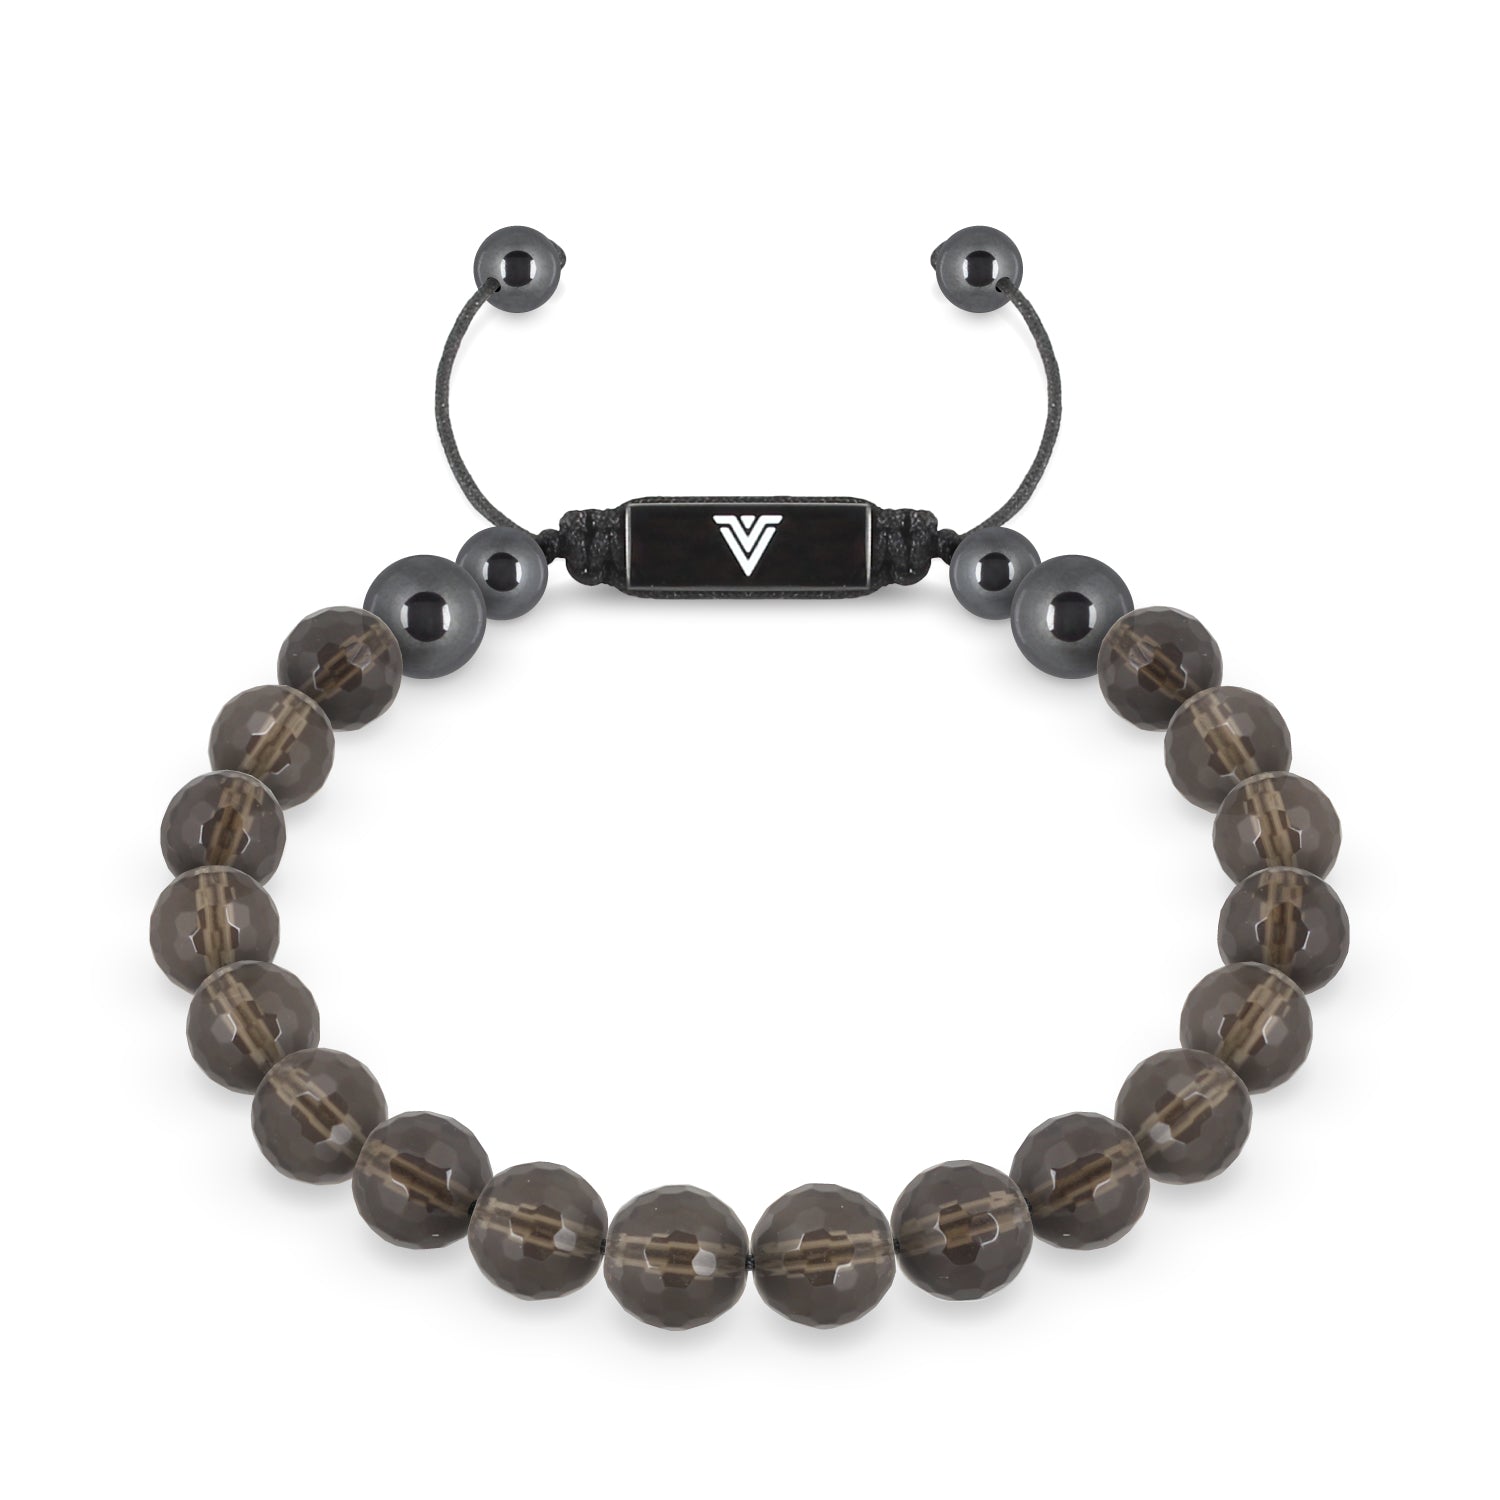 Front view of an 8mm Faceted Smoky Quartz crystal beaded shamballa bracelet with black stainless steel logo bead made by Voltlin